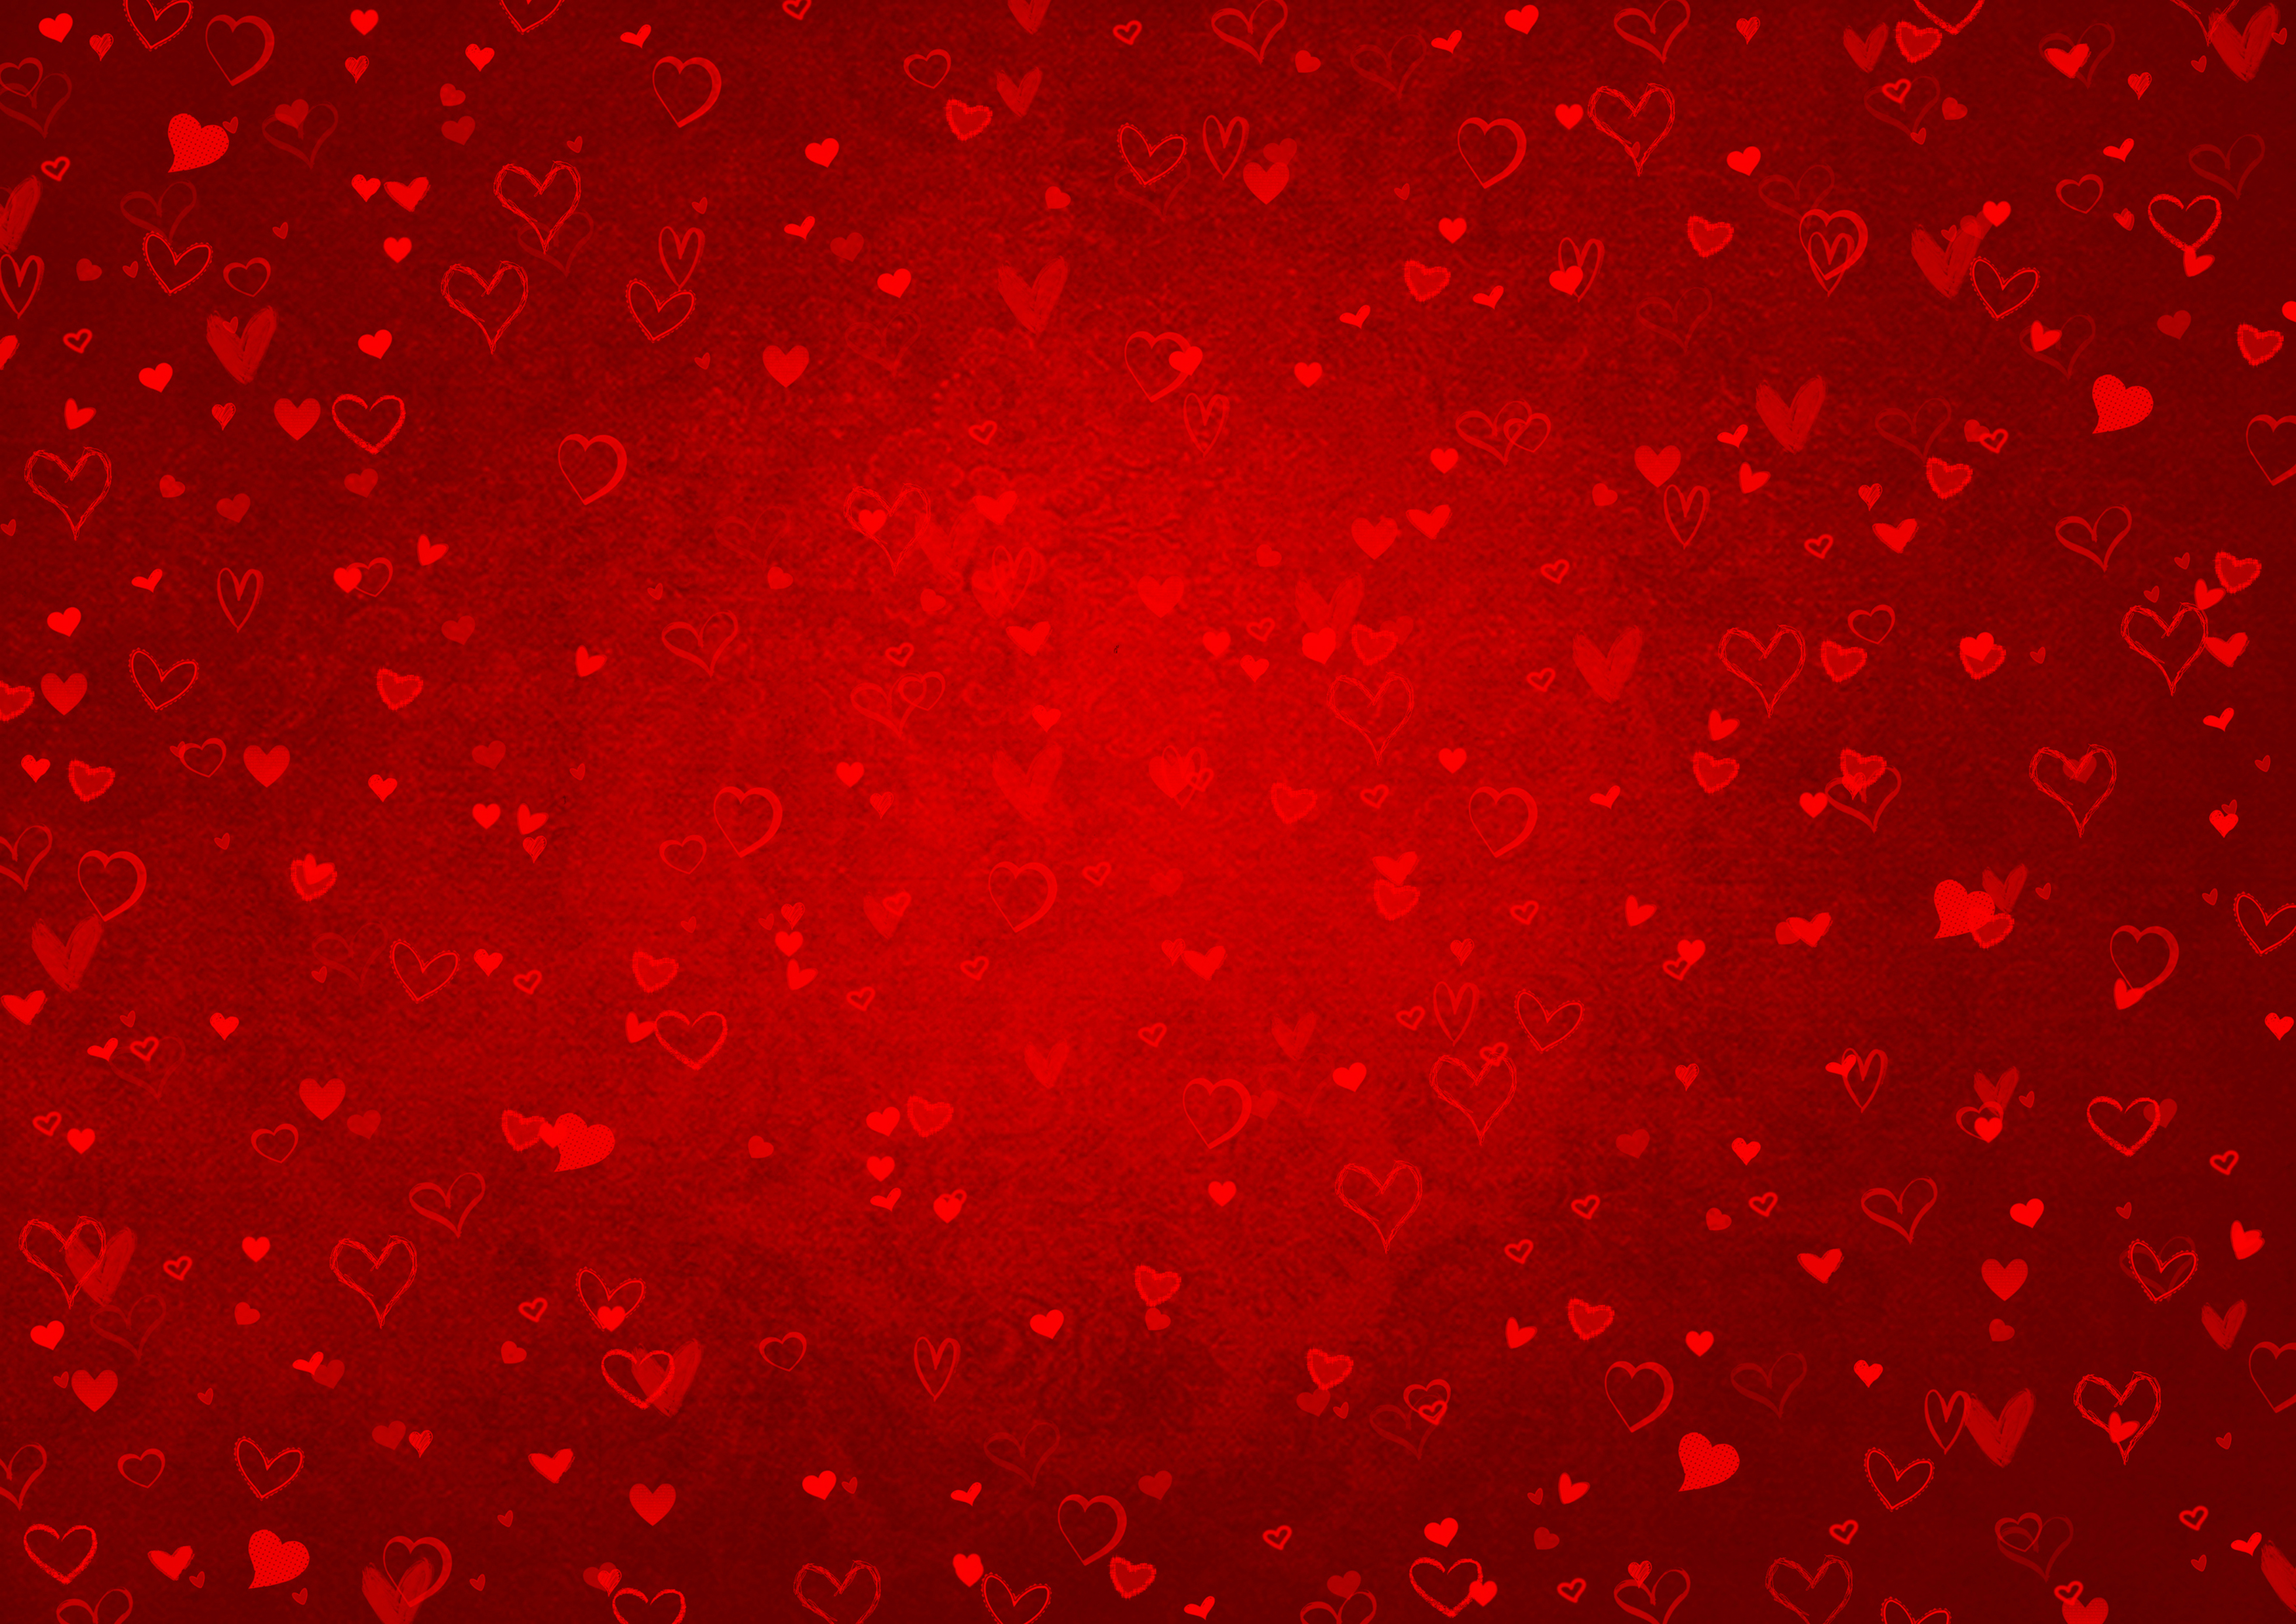 Red Background With Hearts Gallery Yopriceville High